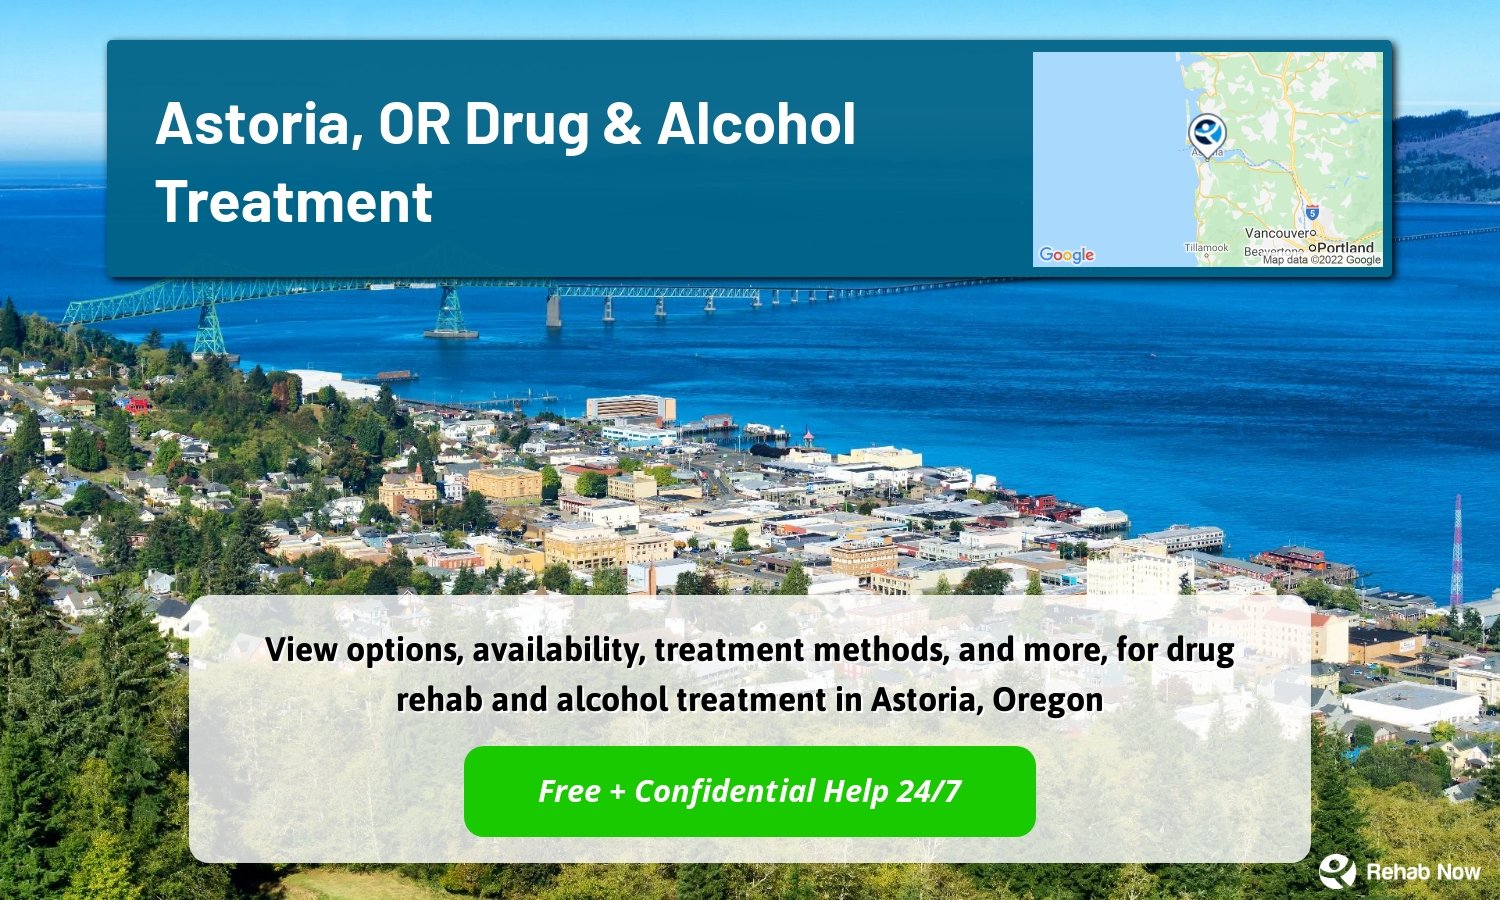 View options, availability, treatment methods, and more, for drug rehab and alcohol treatment in Astoria, Oregon